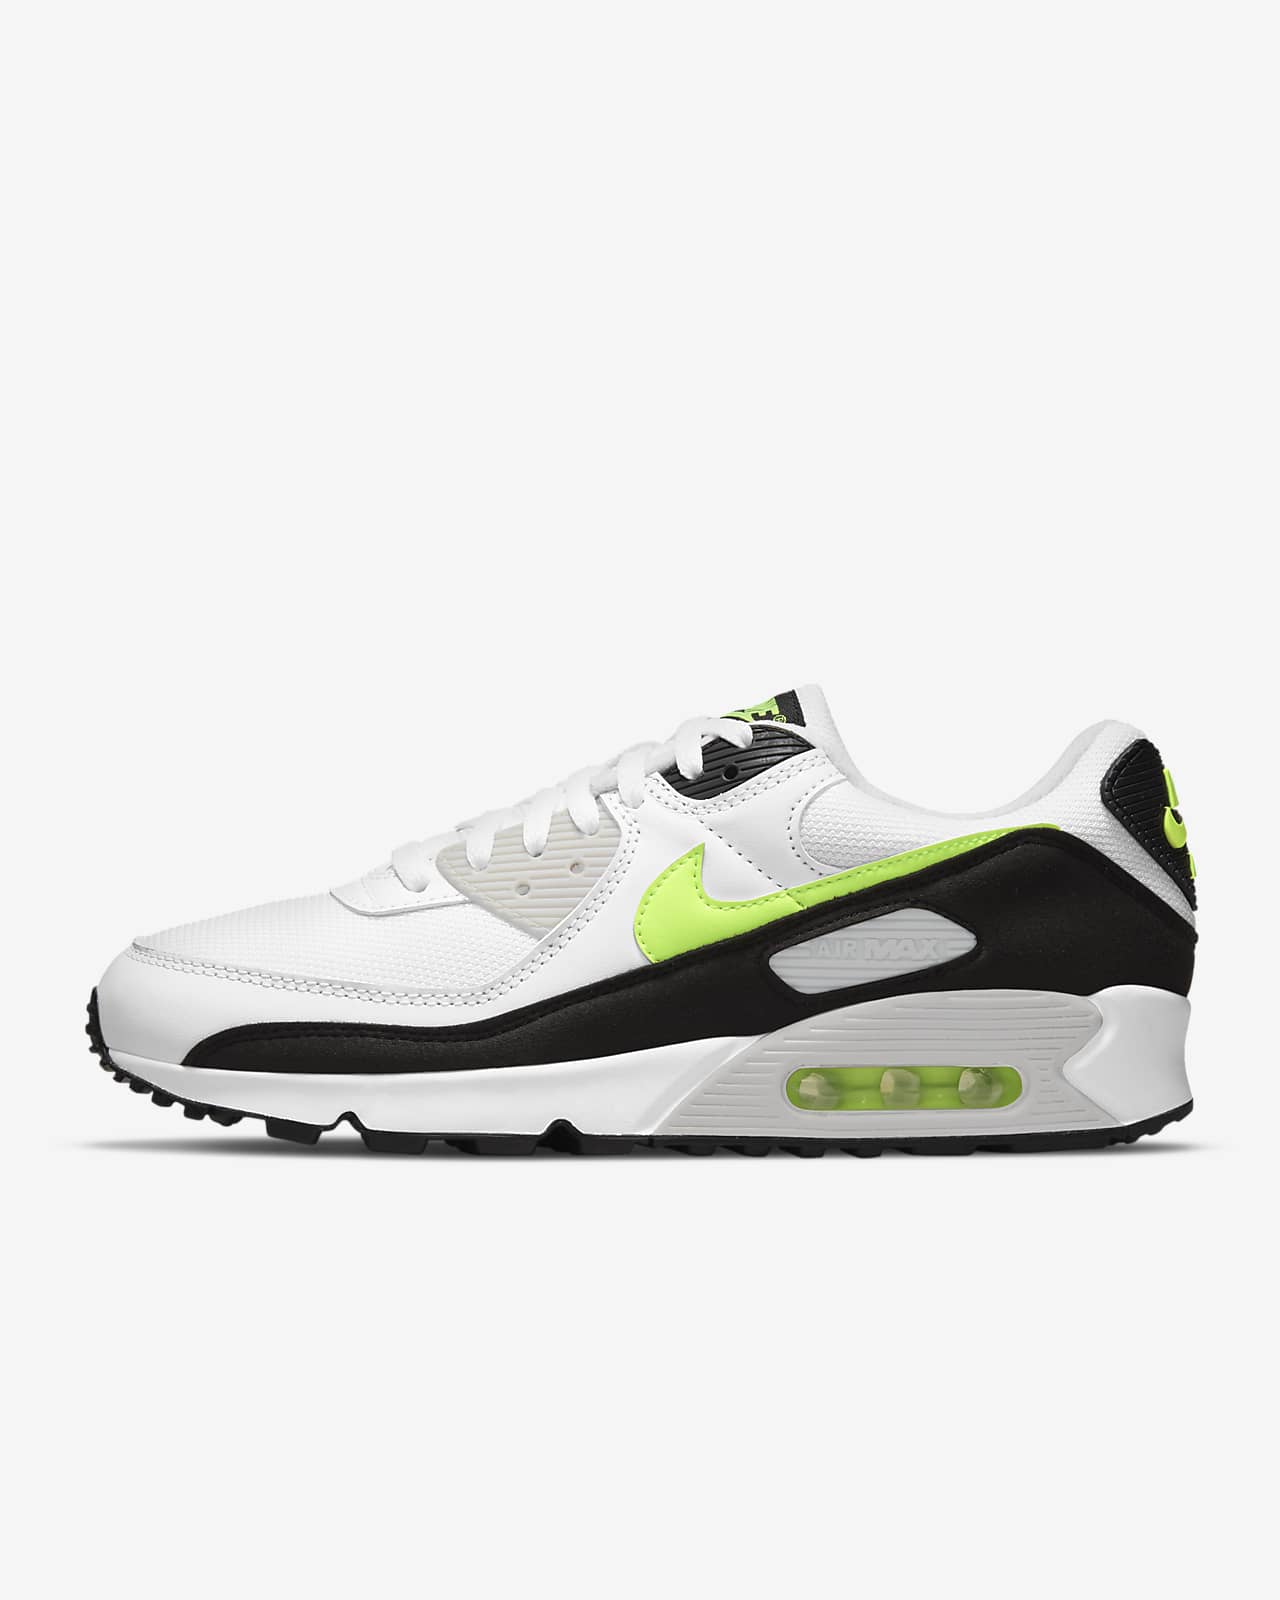 Nike Air Max 90 'Hot Lime' $96.00 Free Shipping - Sneaker Steal